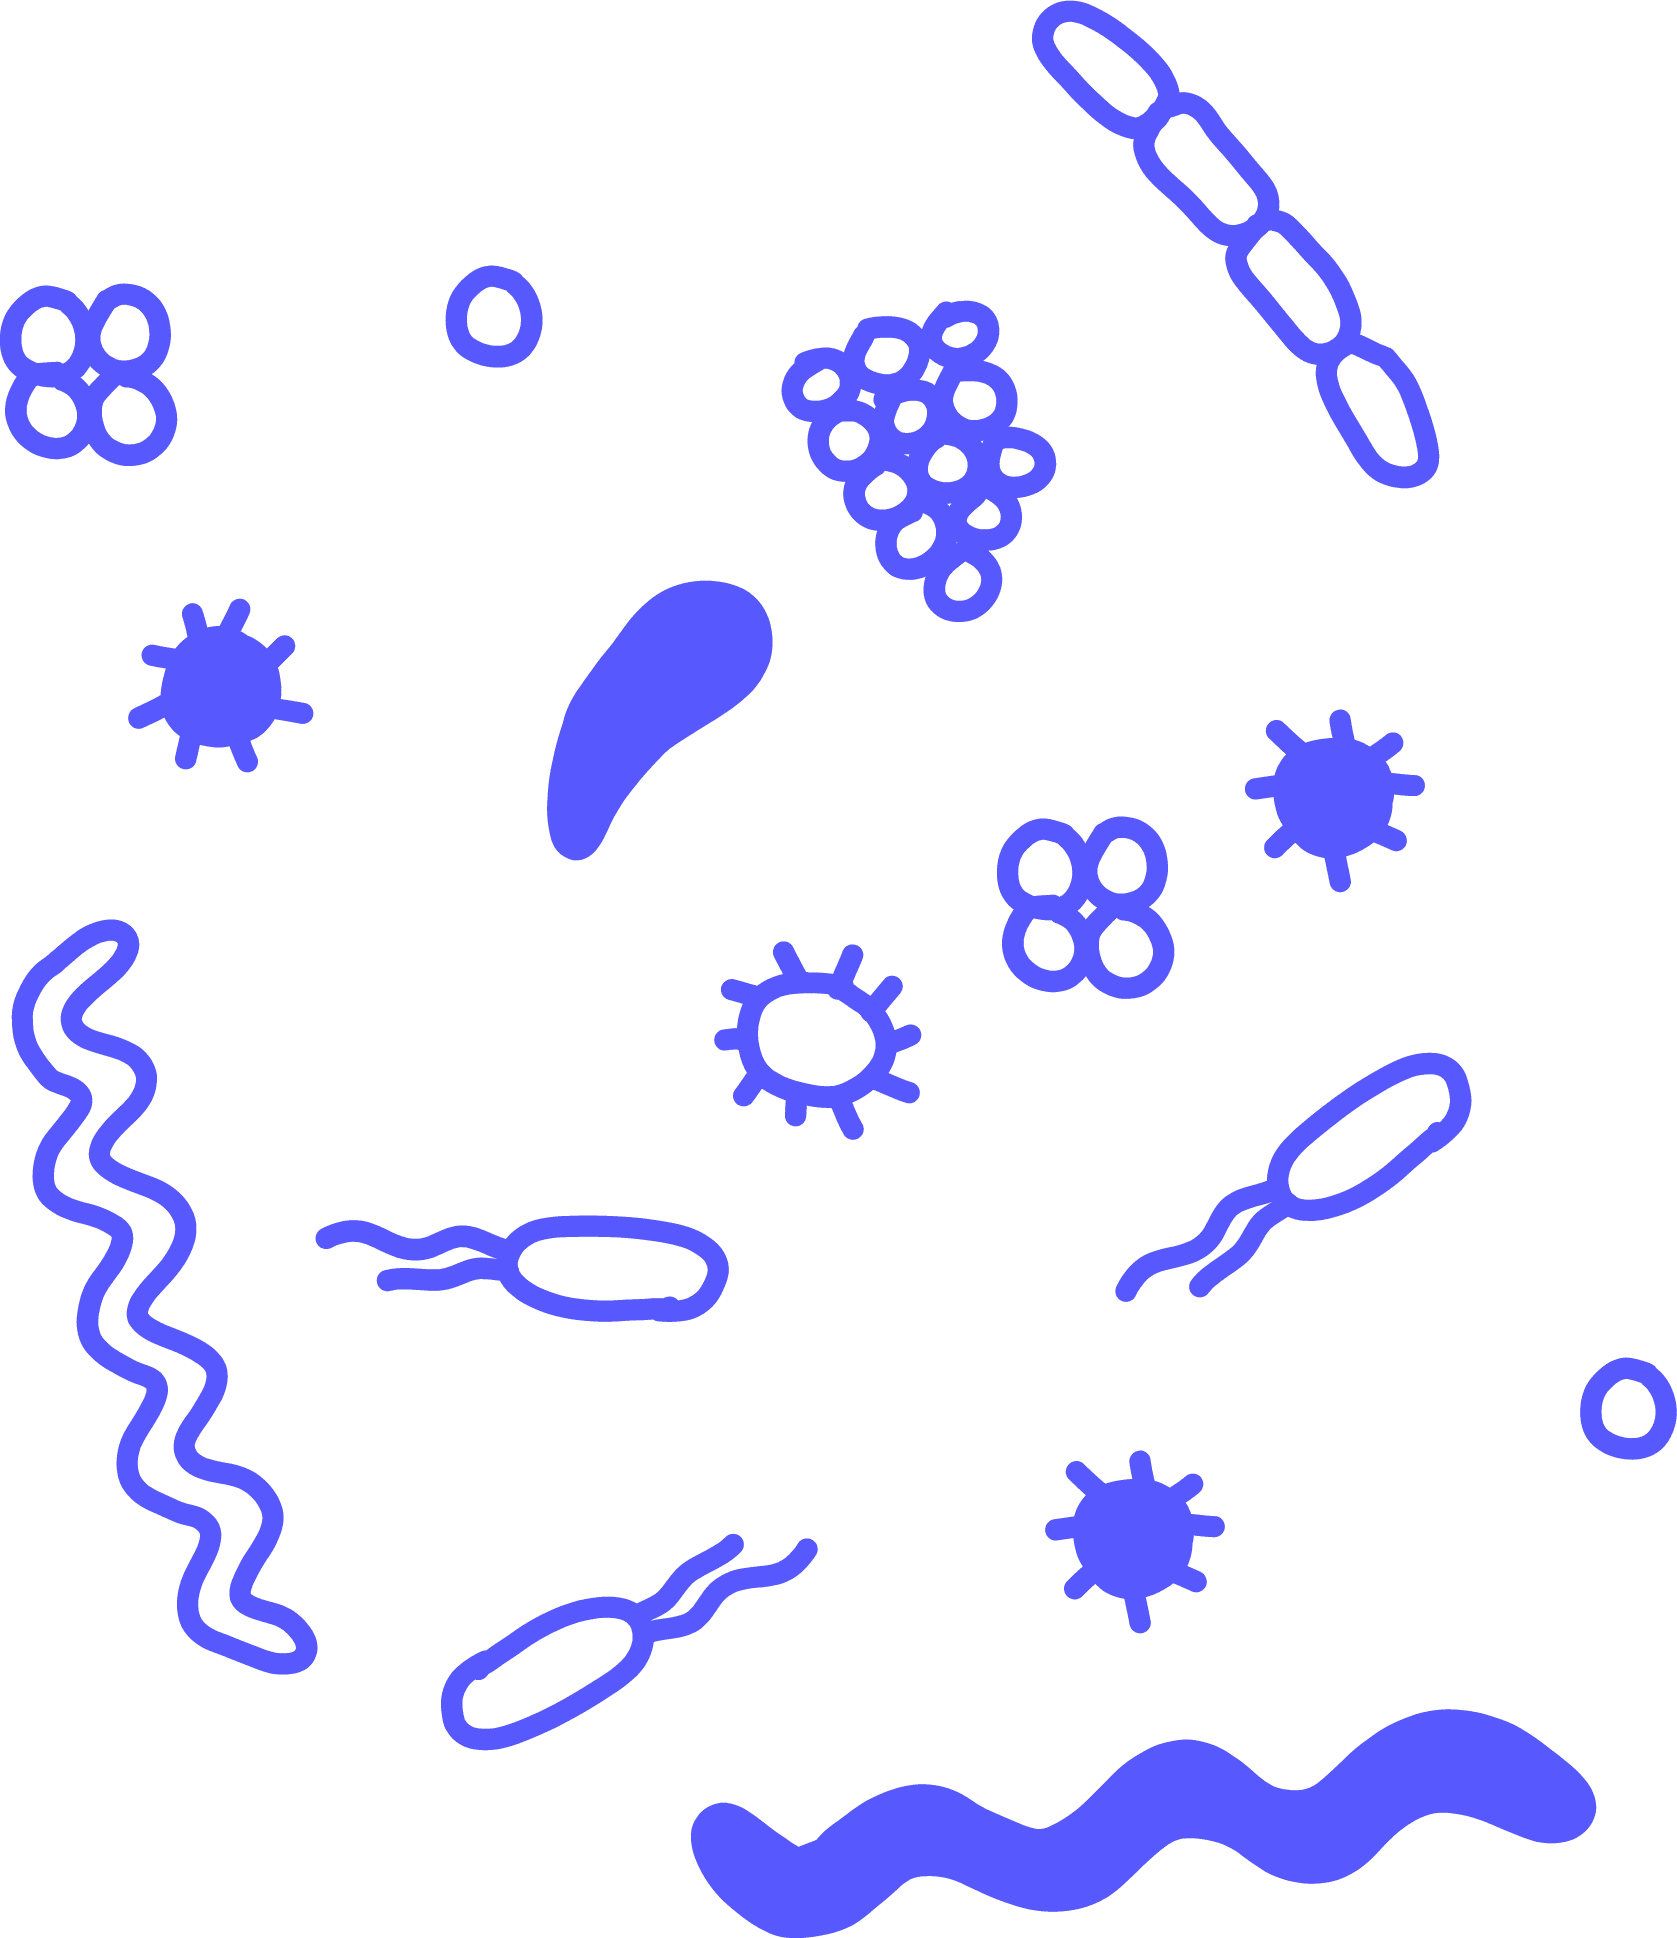 Illustration of a microbiome